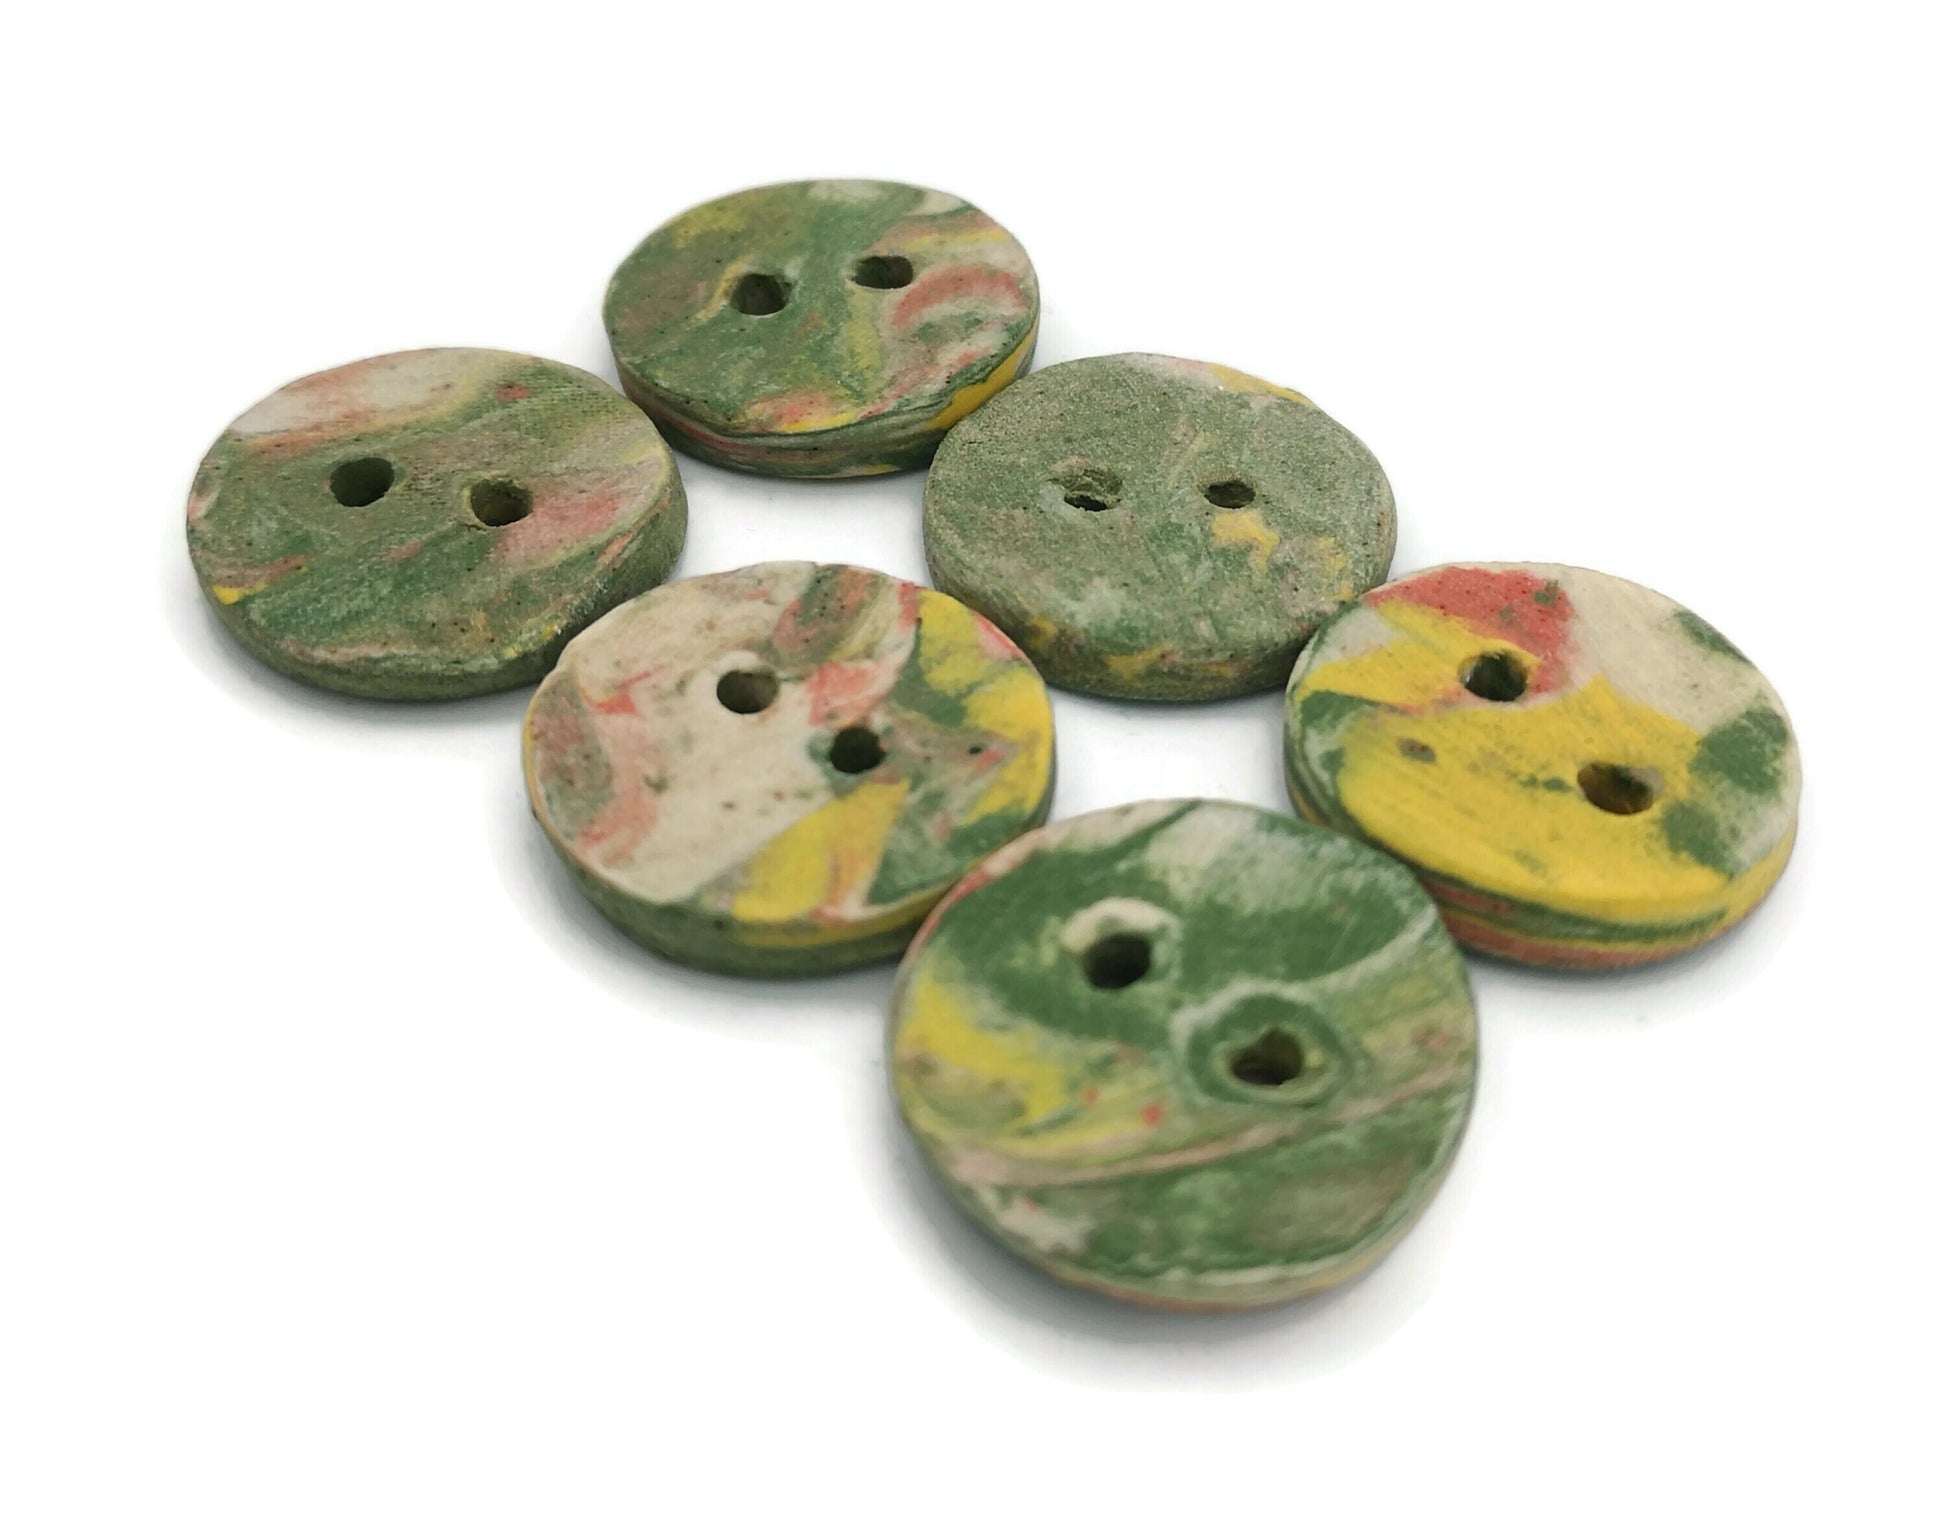 Handmade Ceramic Sewing Buttons Lot Of 6, Novelty Buttons For Crafts, Best Sellers Custom Buttons, Unique Backpack Buttons Cute, Coat Button - Ceramica Ana Rafael